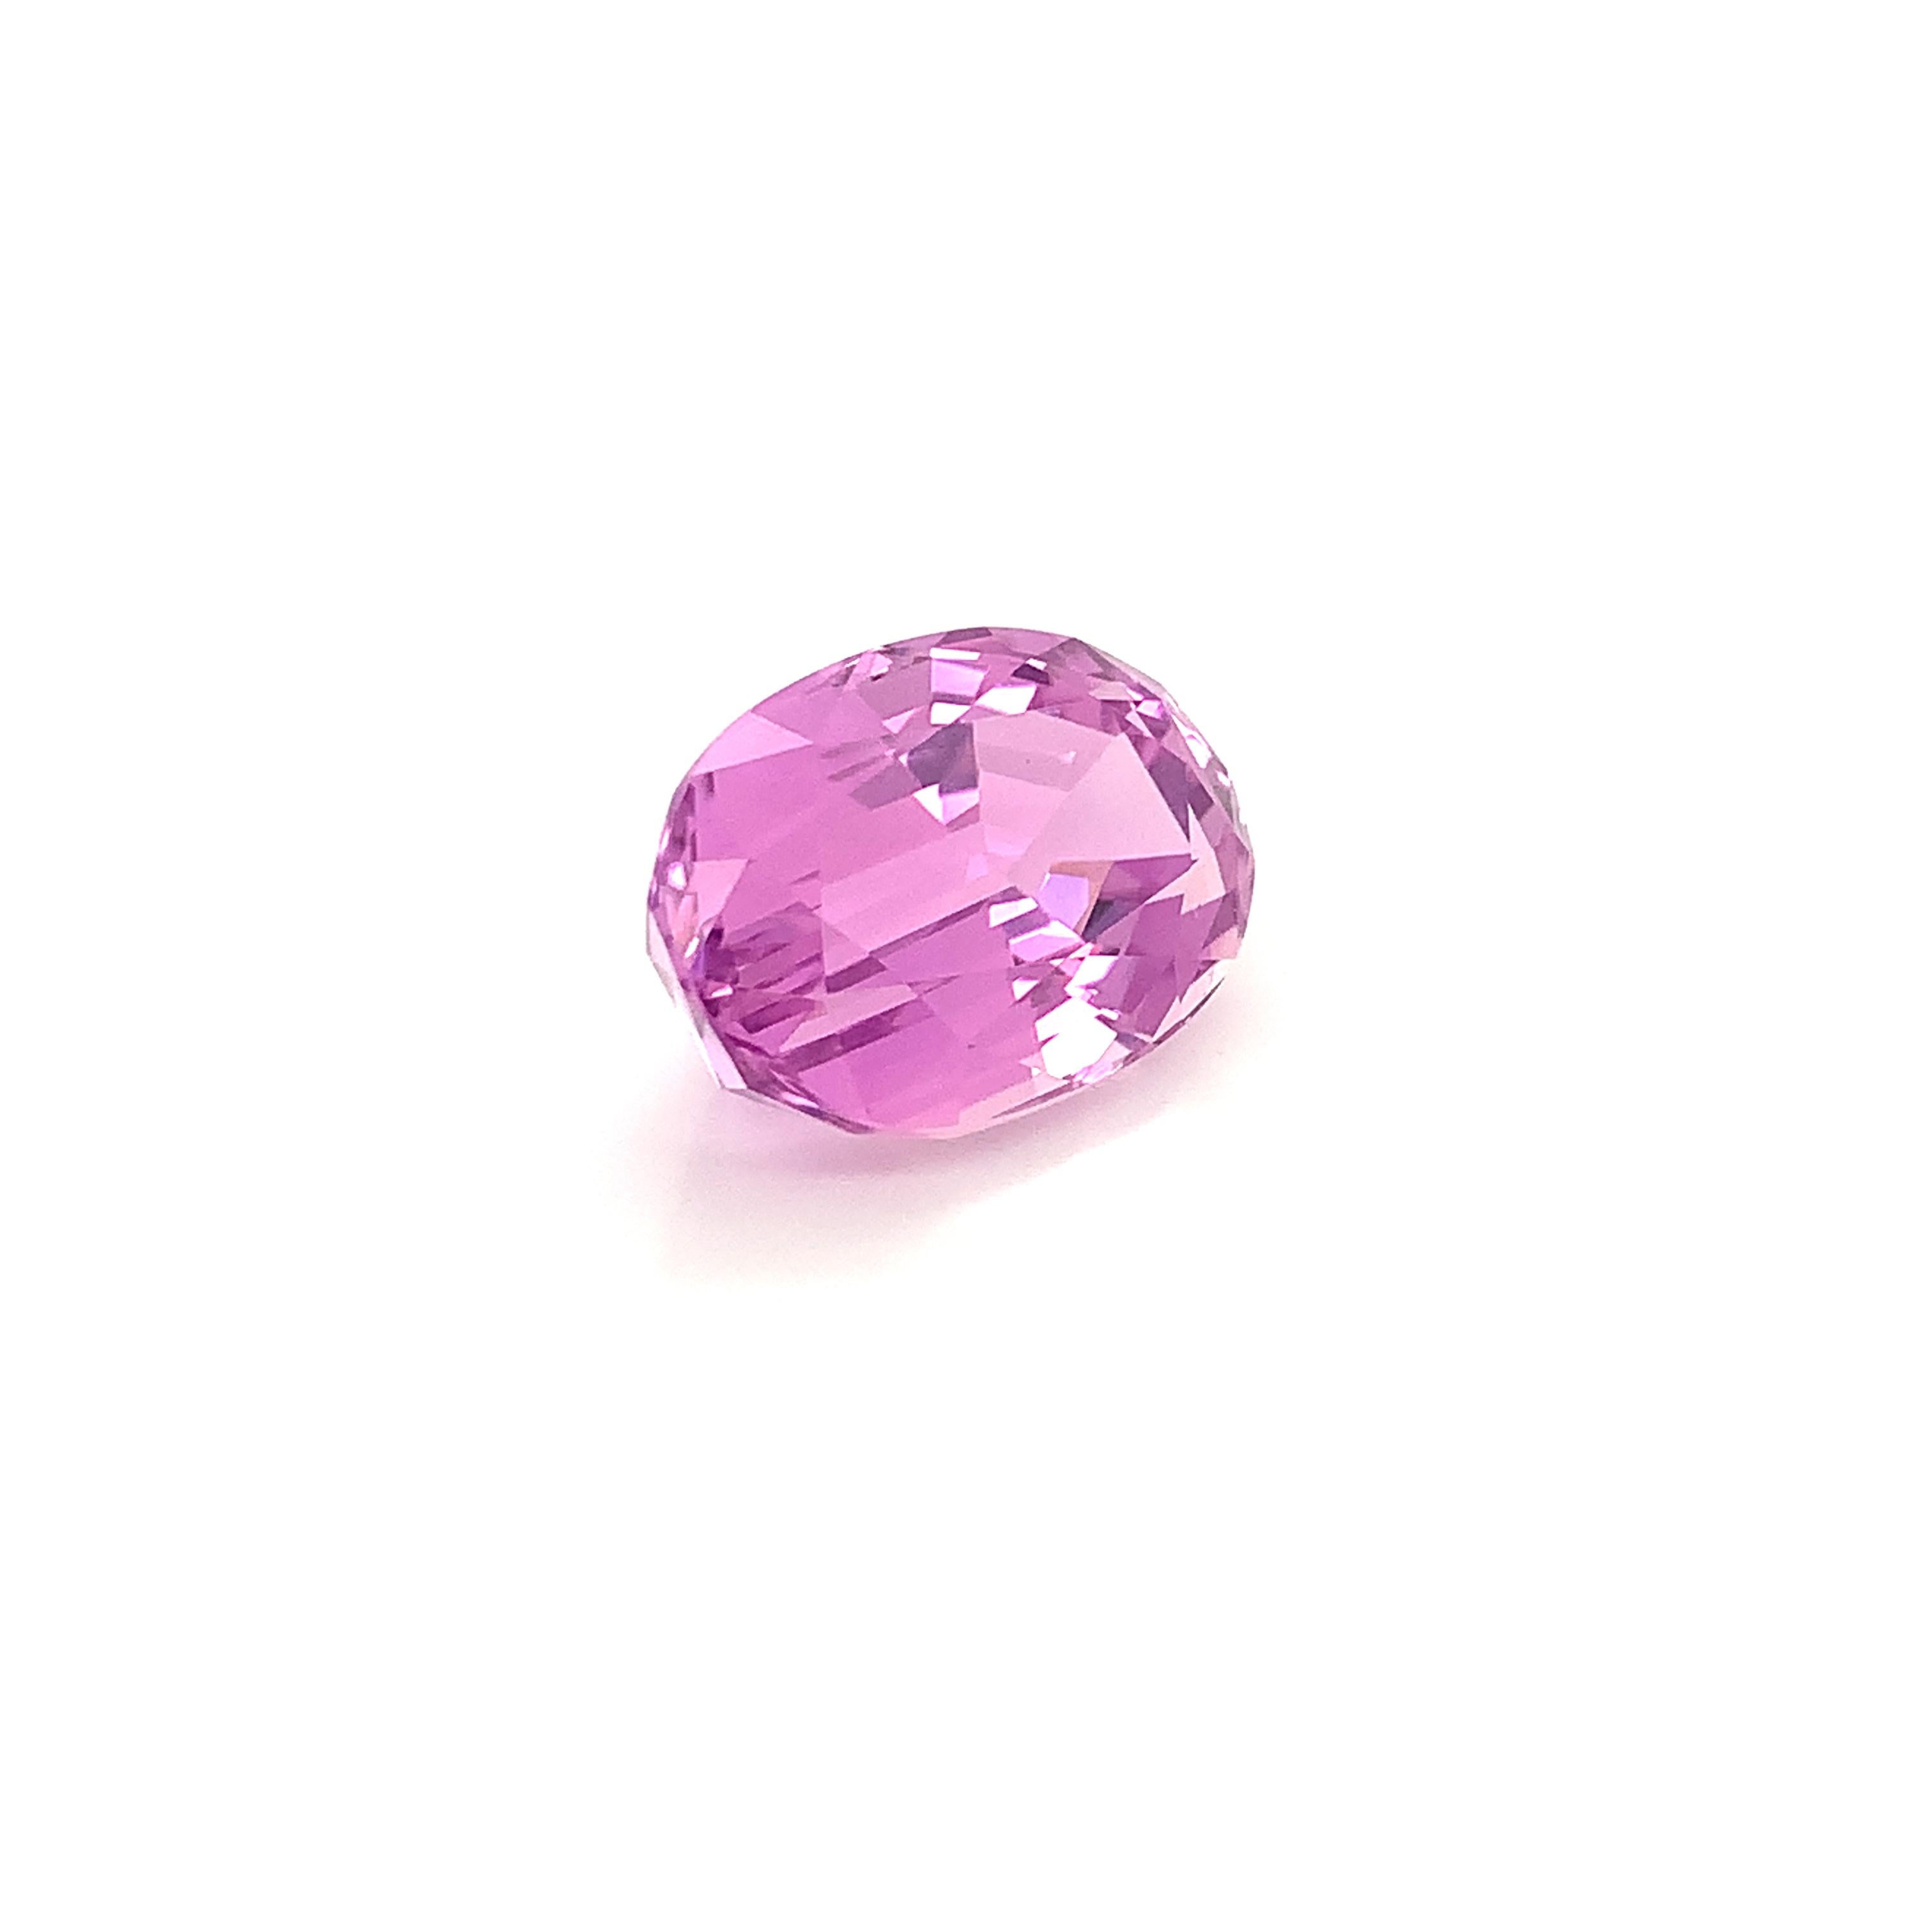 Stunning 26 Cts Kunzite  oval shape cut gem offered loose to a special occasion.
Top colour and very clean, this stone is a masterpiece for an unique design.
We offer tailor made jewelry work in our workshop in Italy ( pendant, bracelet, necklace,